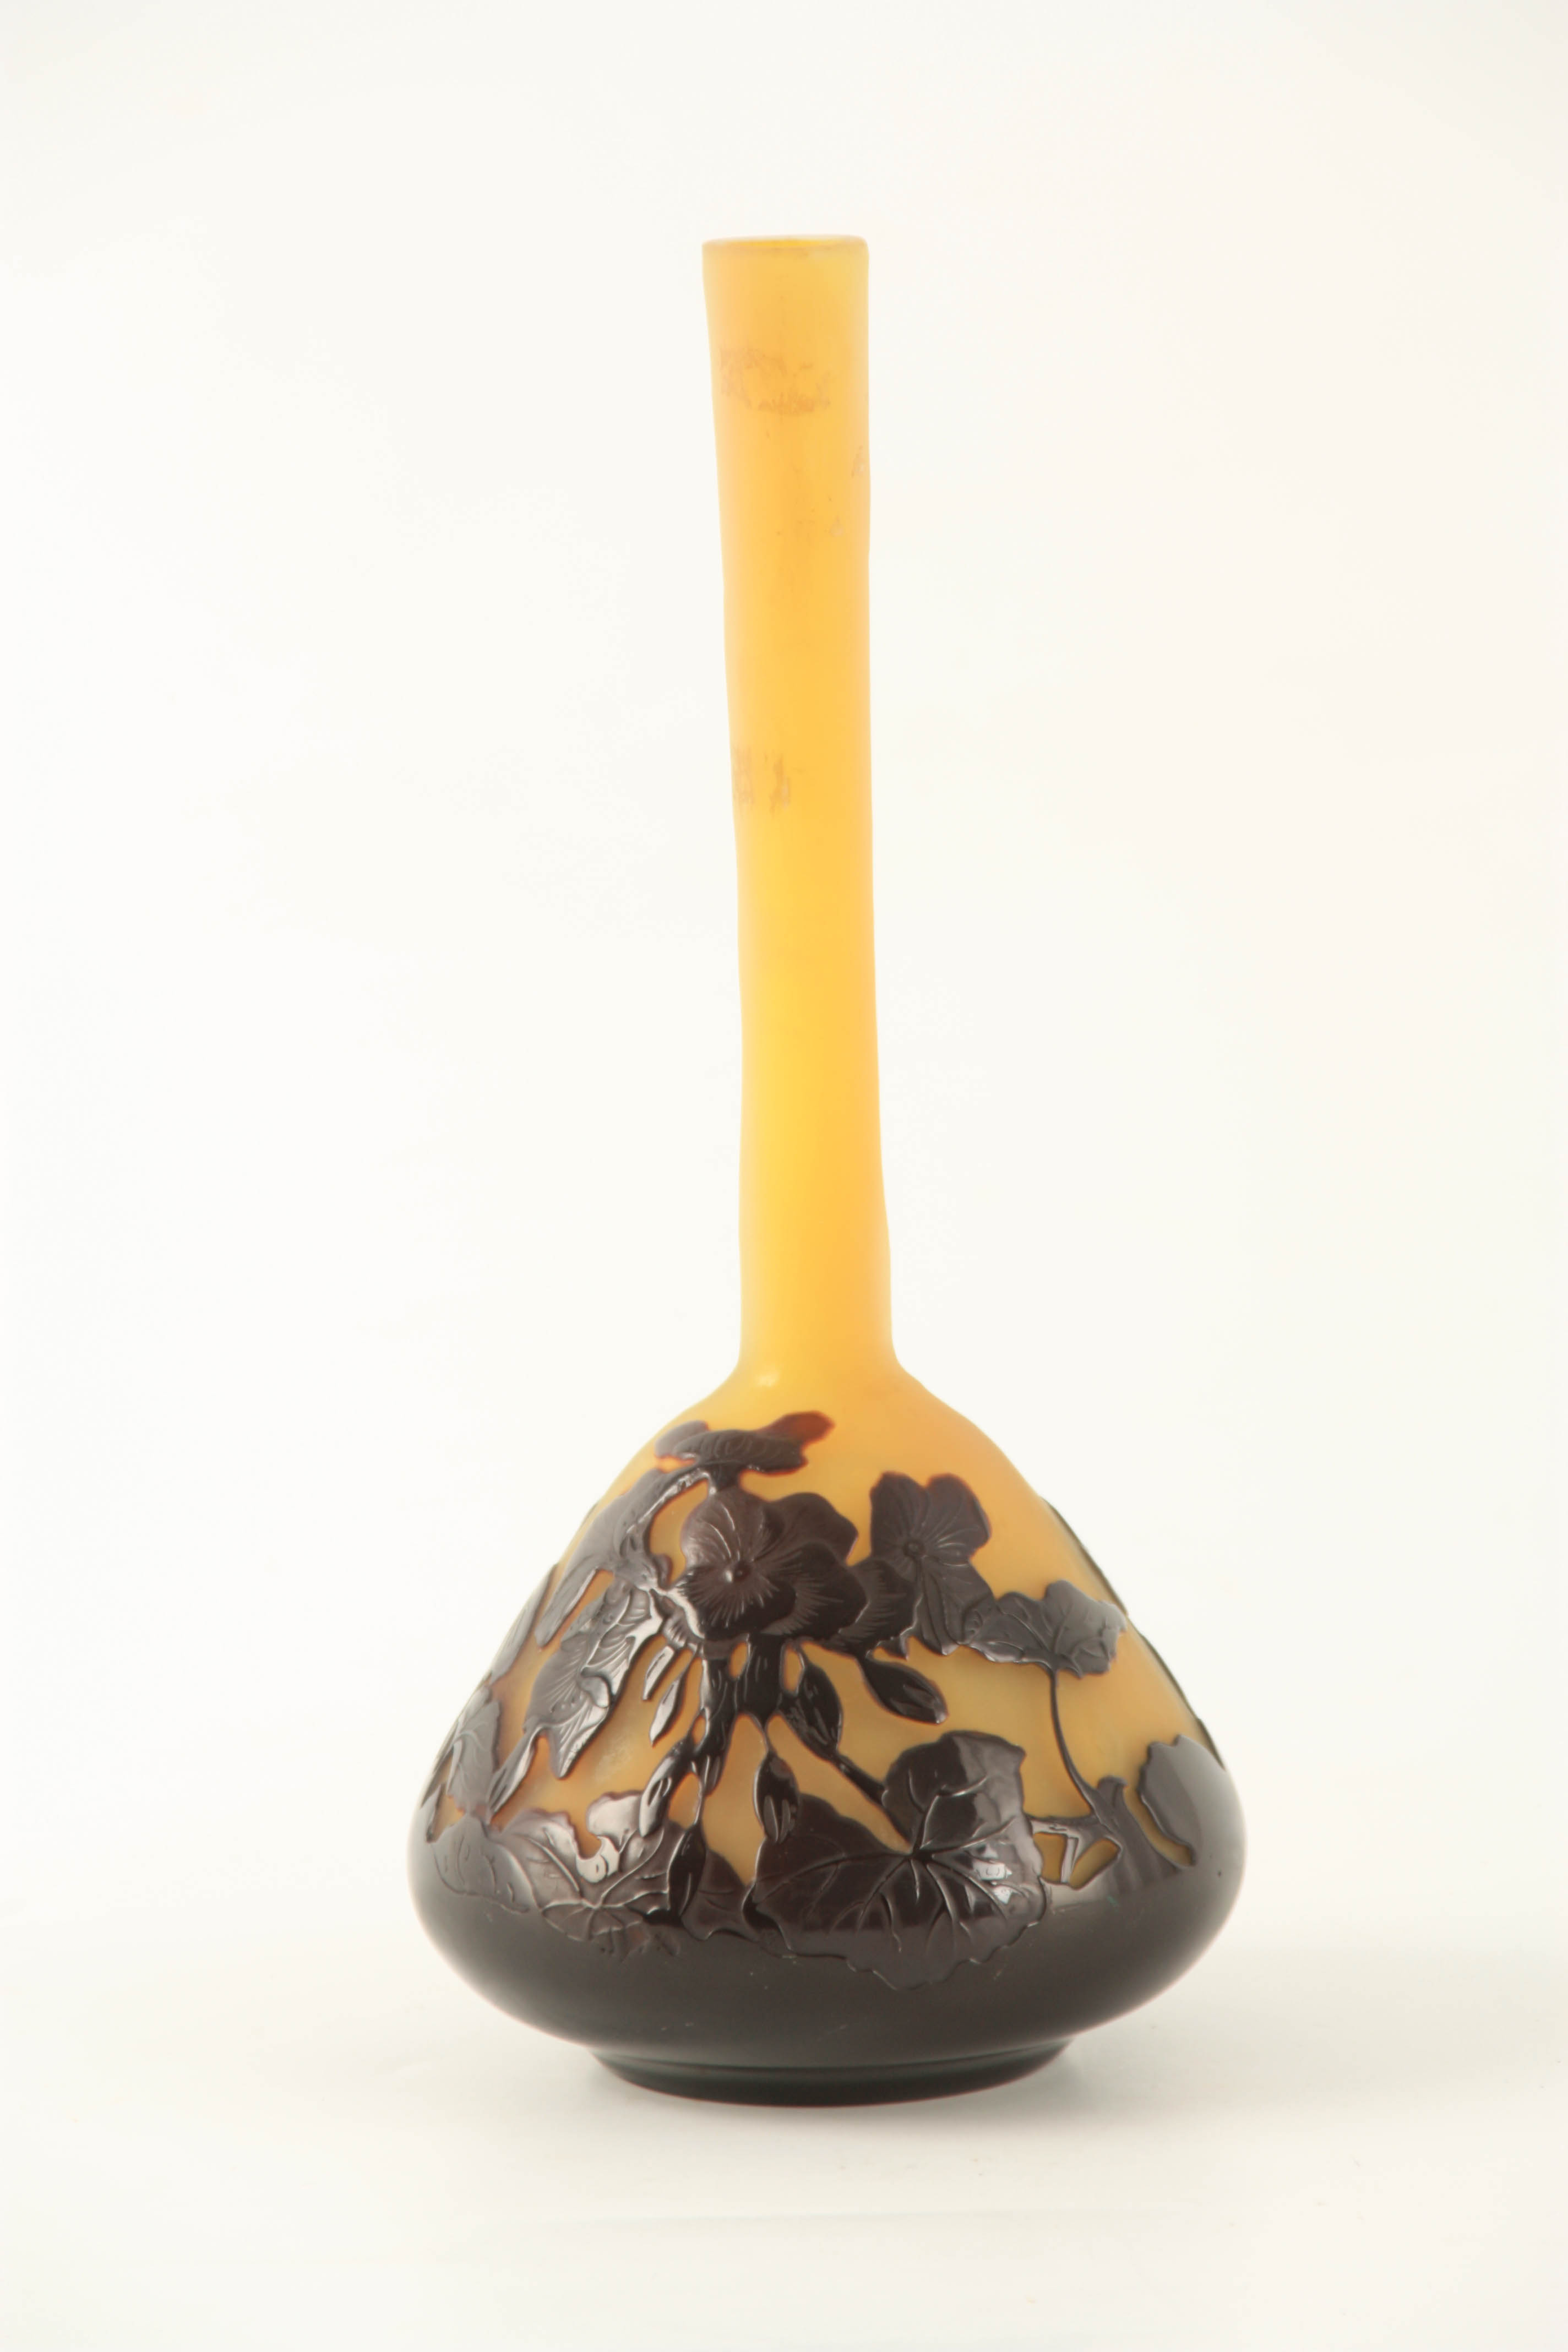 AN ART NOUVEAU GALLE GLASS CABINET VASE the pale opaque yellow ground with slender stem overlaid - Image 2 of 4